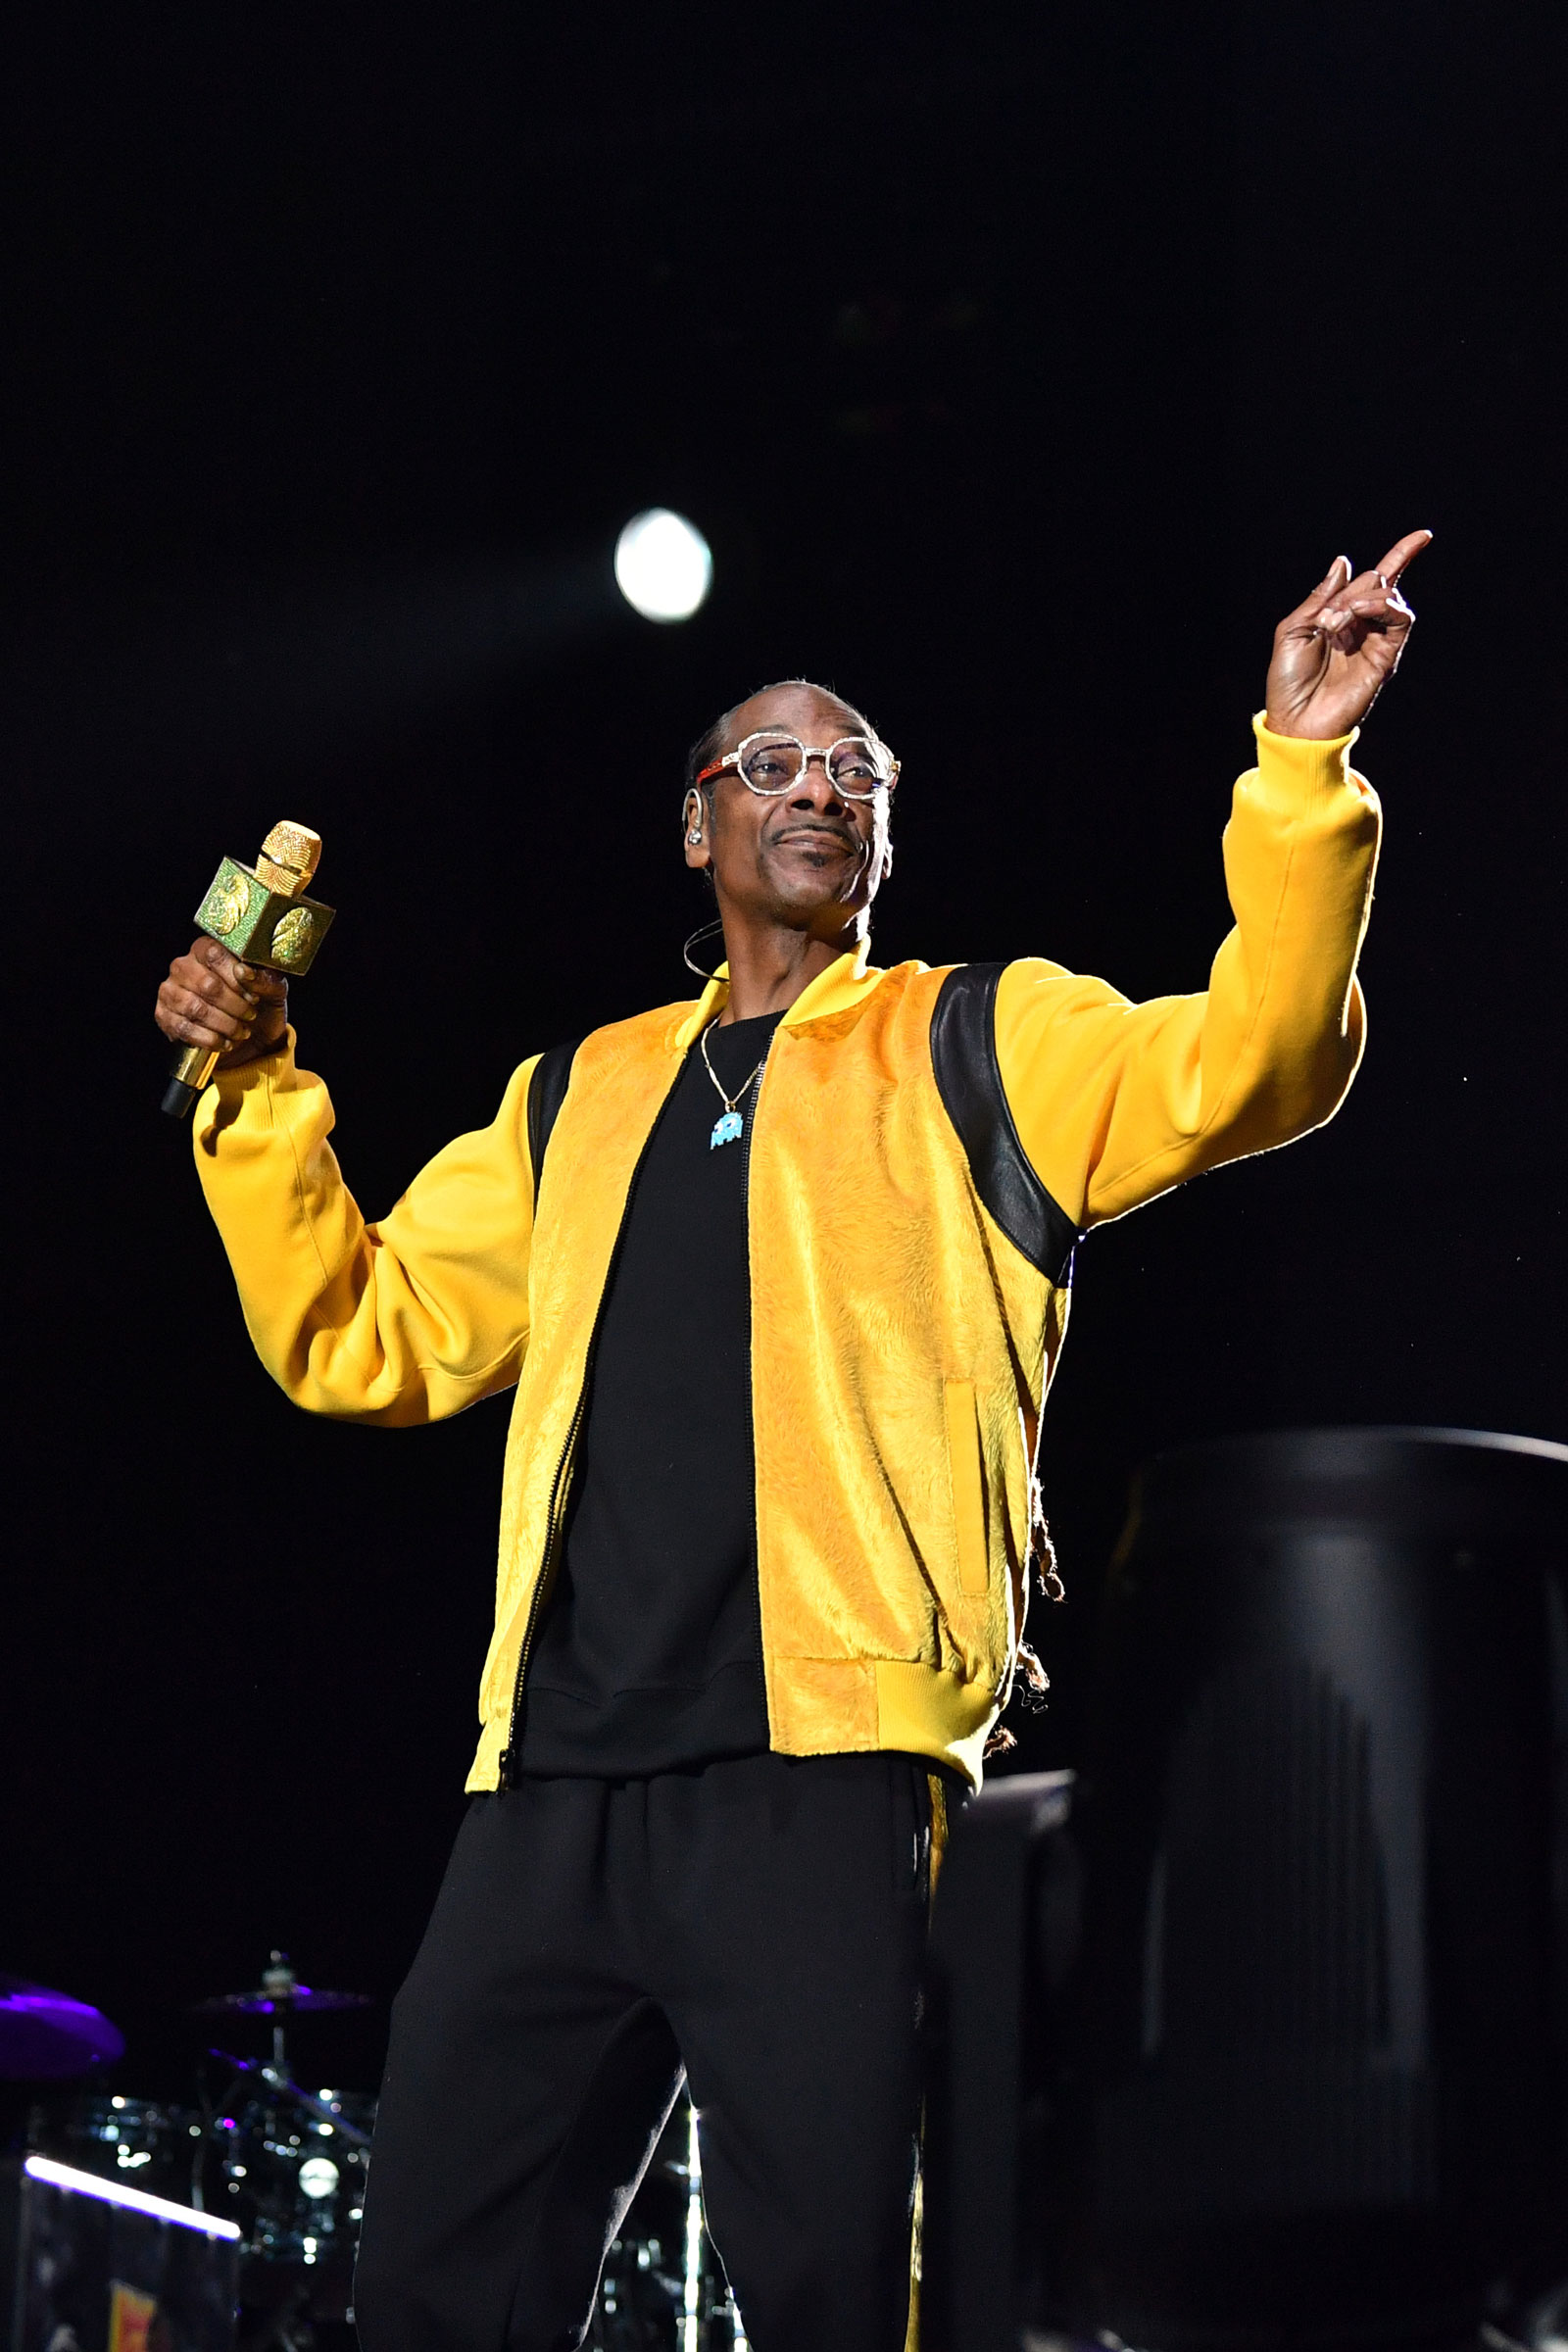 Snoop Dogg performs at the 2022 LA3C Festival at Los Angeles State Historic Park on Dec. 10, 2022.